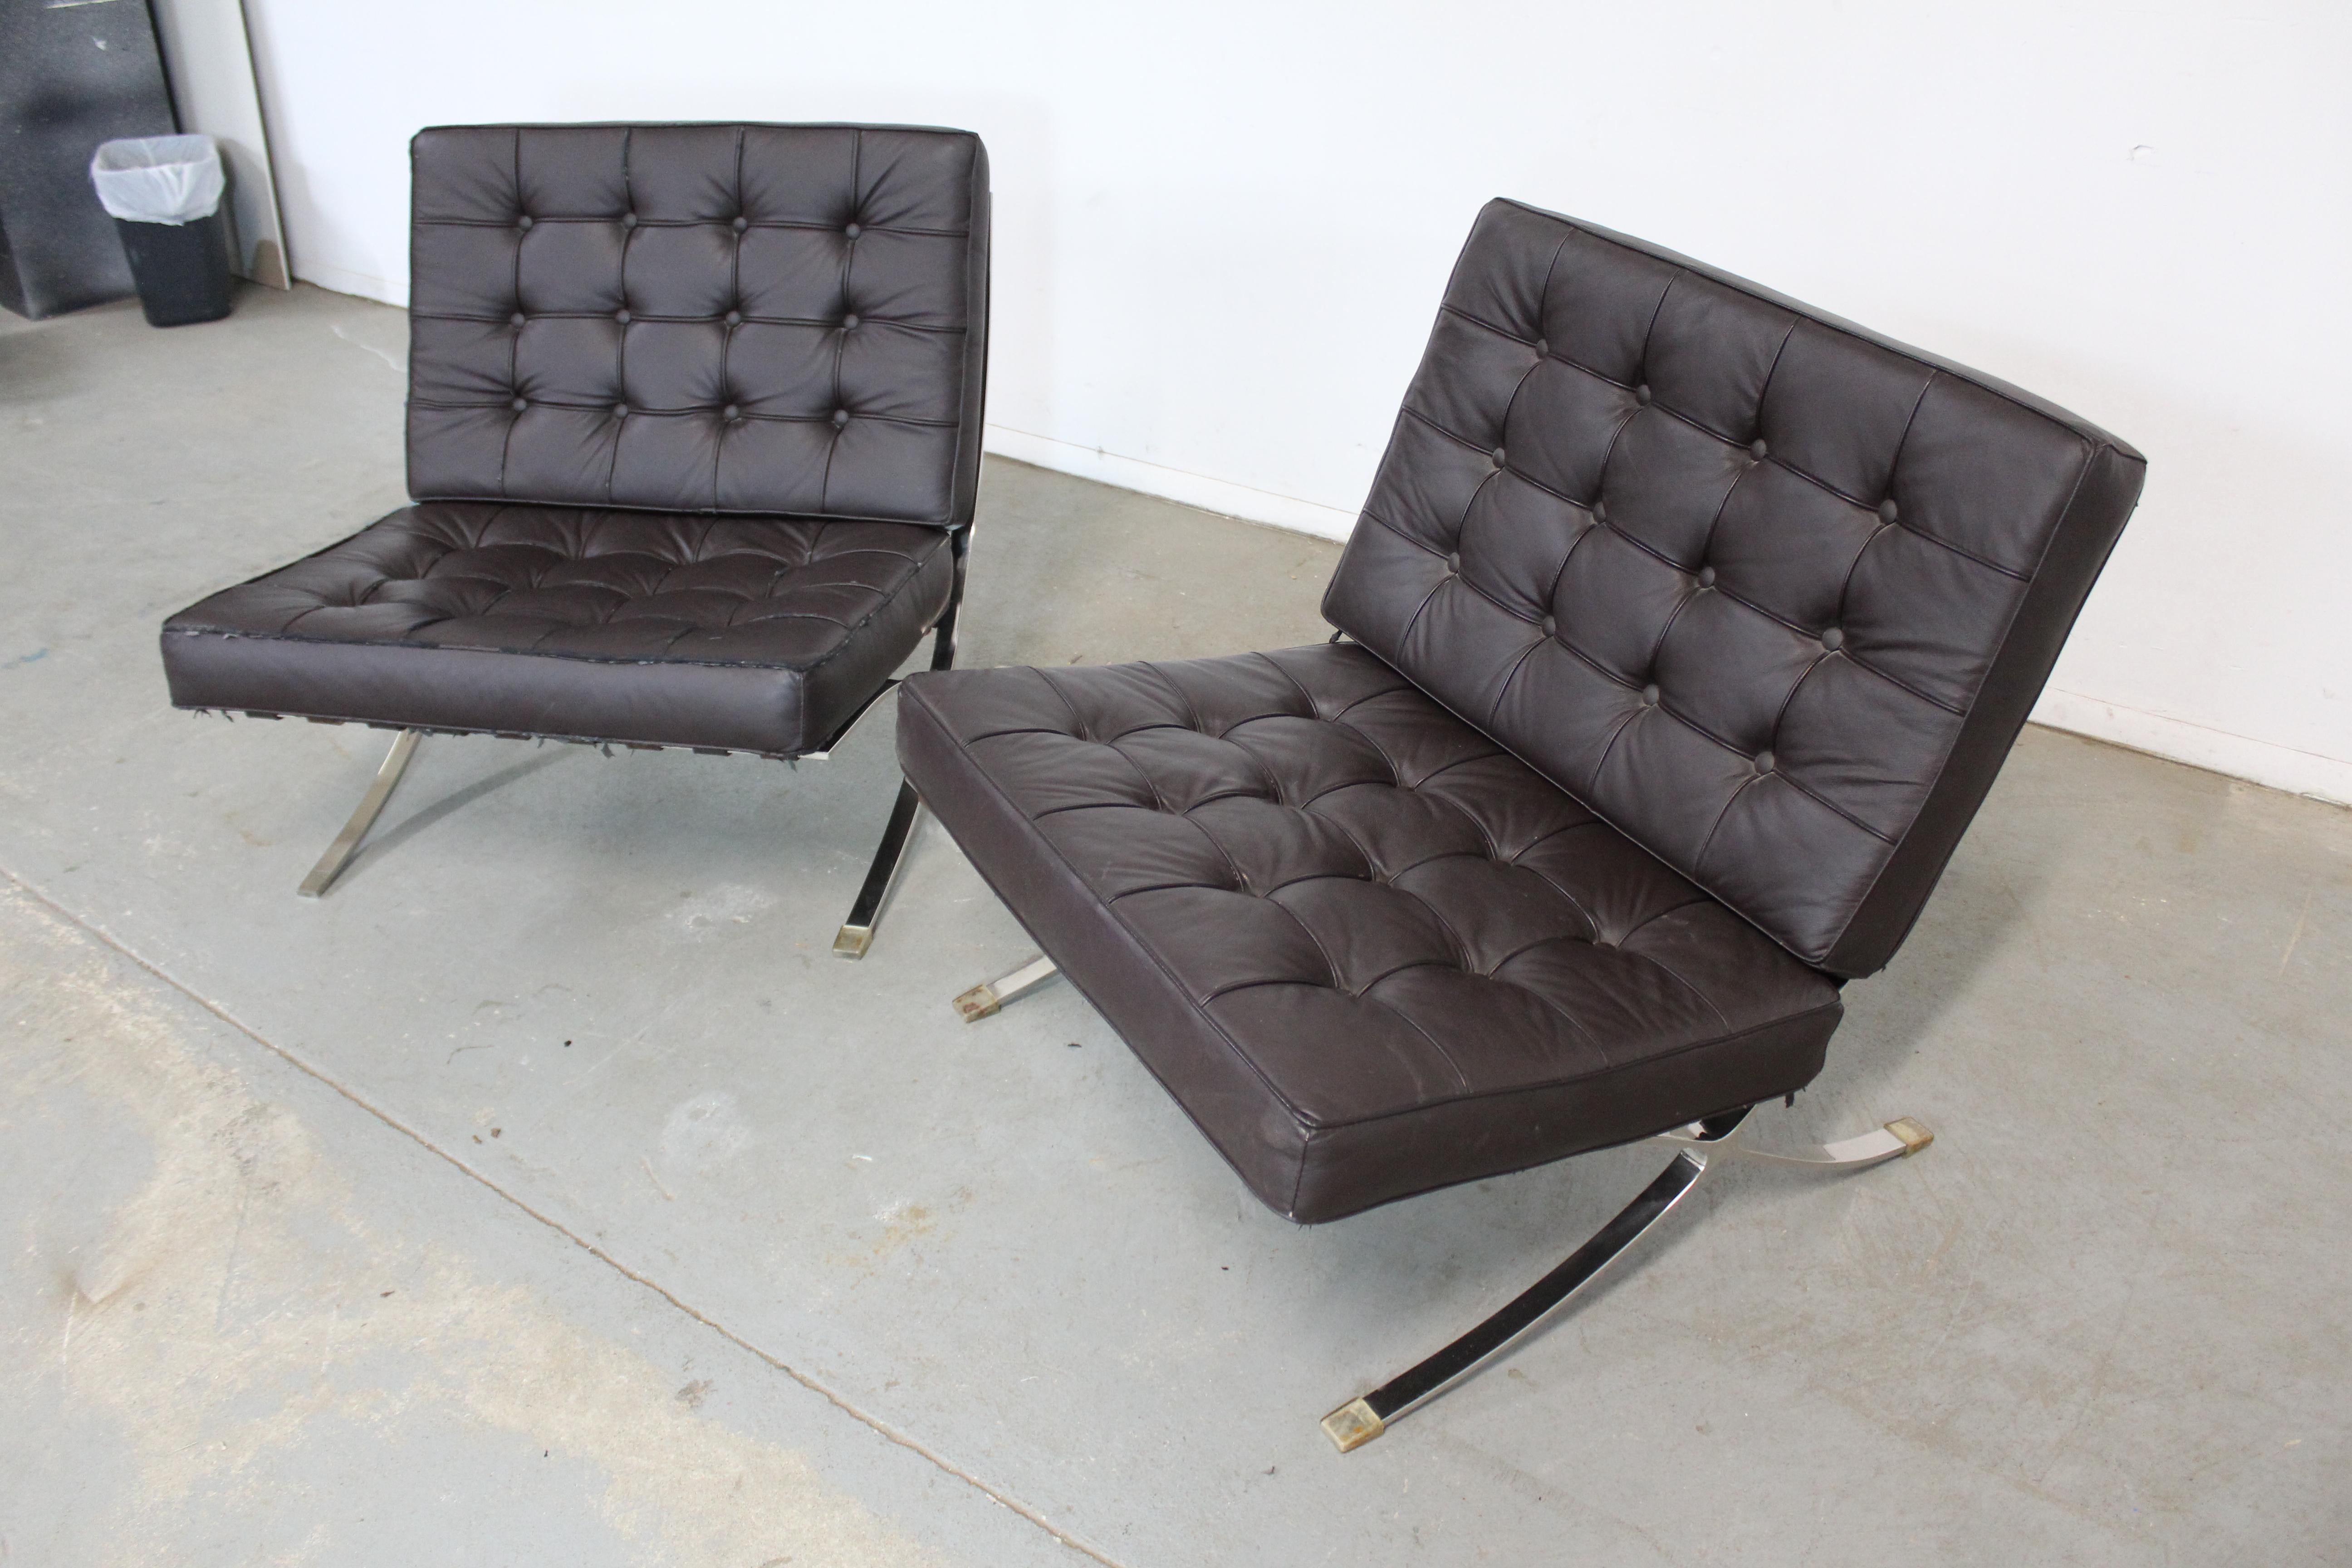 Pair of Vintage Mid-Century Modern Chrome Barcelona Style Lounge Chairs In Fair Condition For Sale In Wilmington, DE